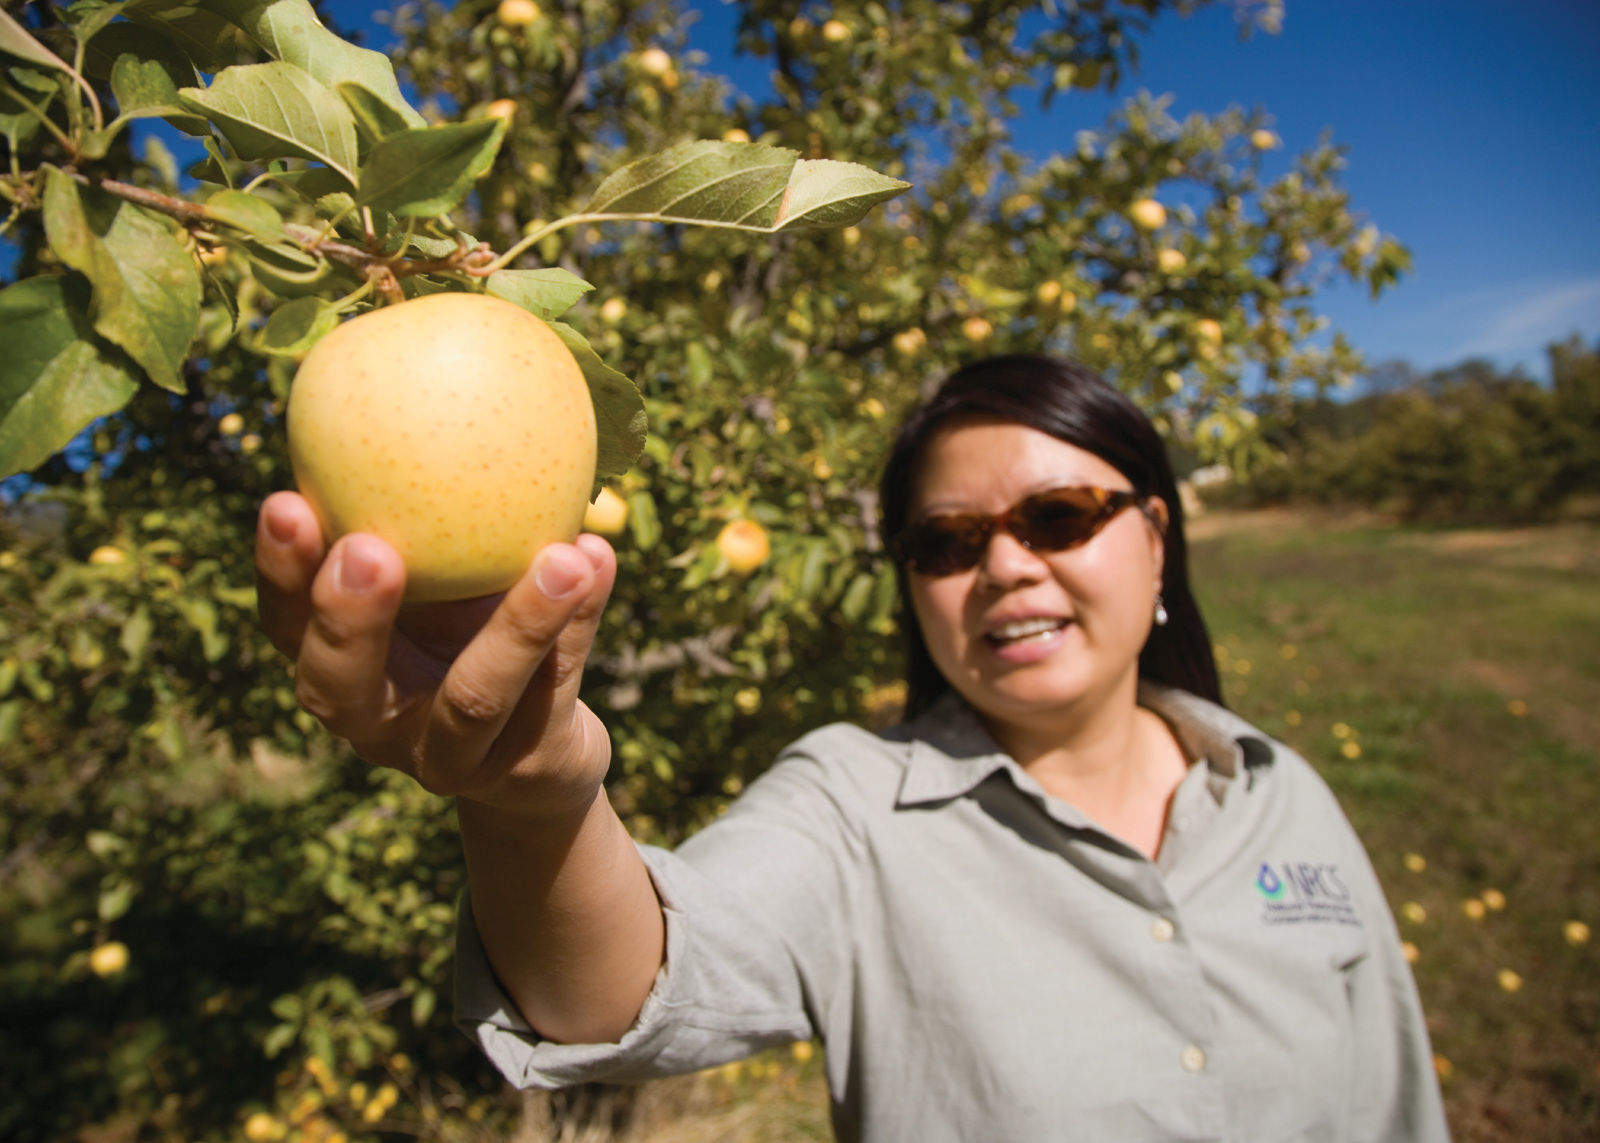 A woman in sunglasses holding a growing yellow apple.